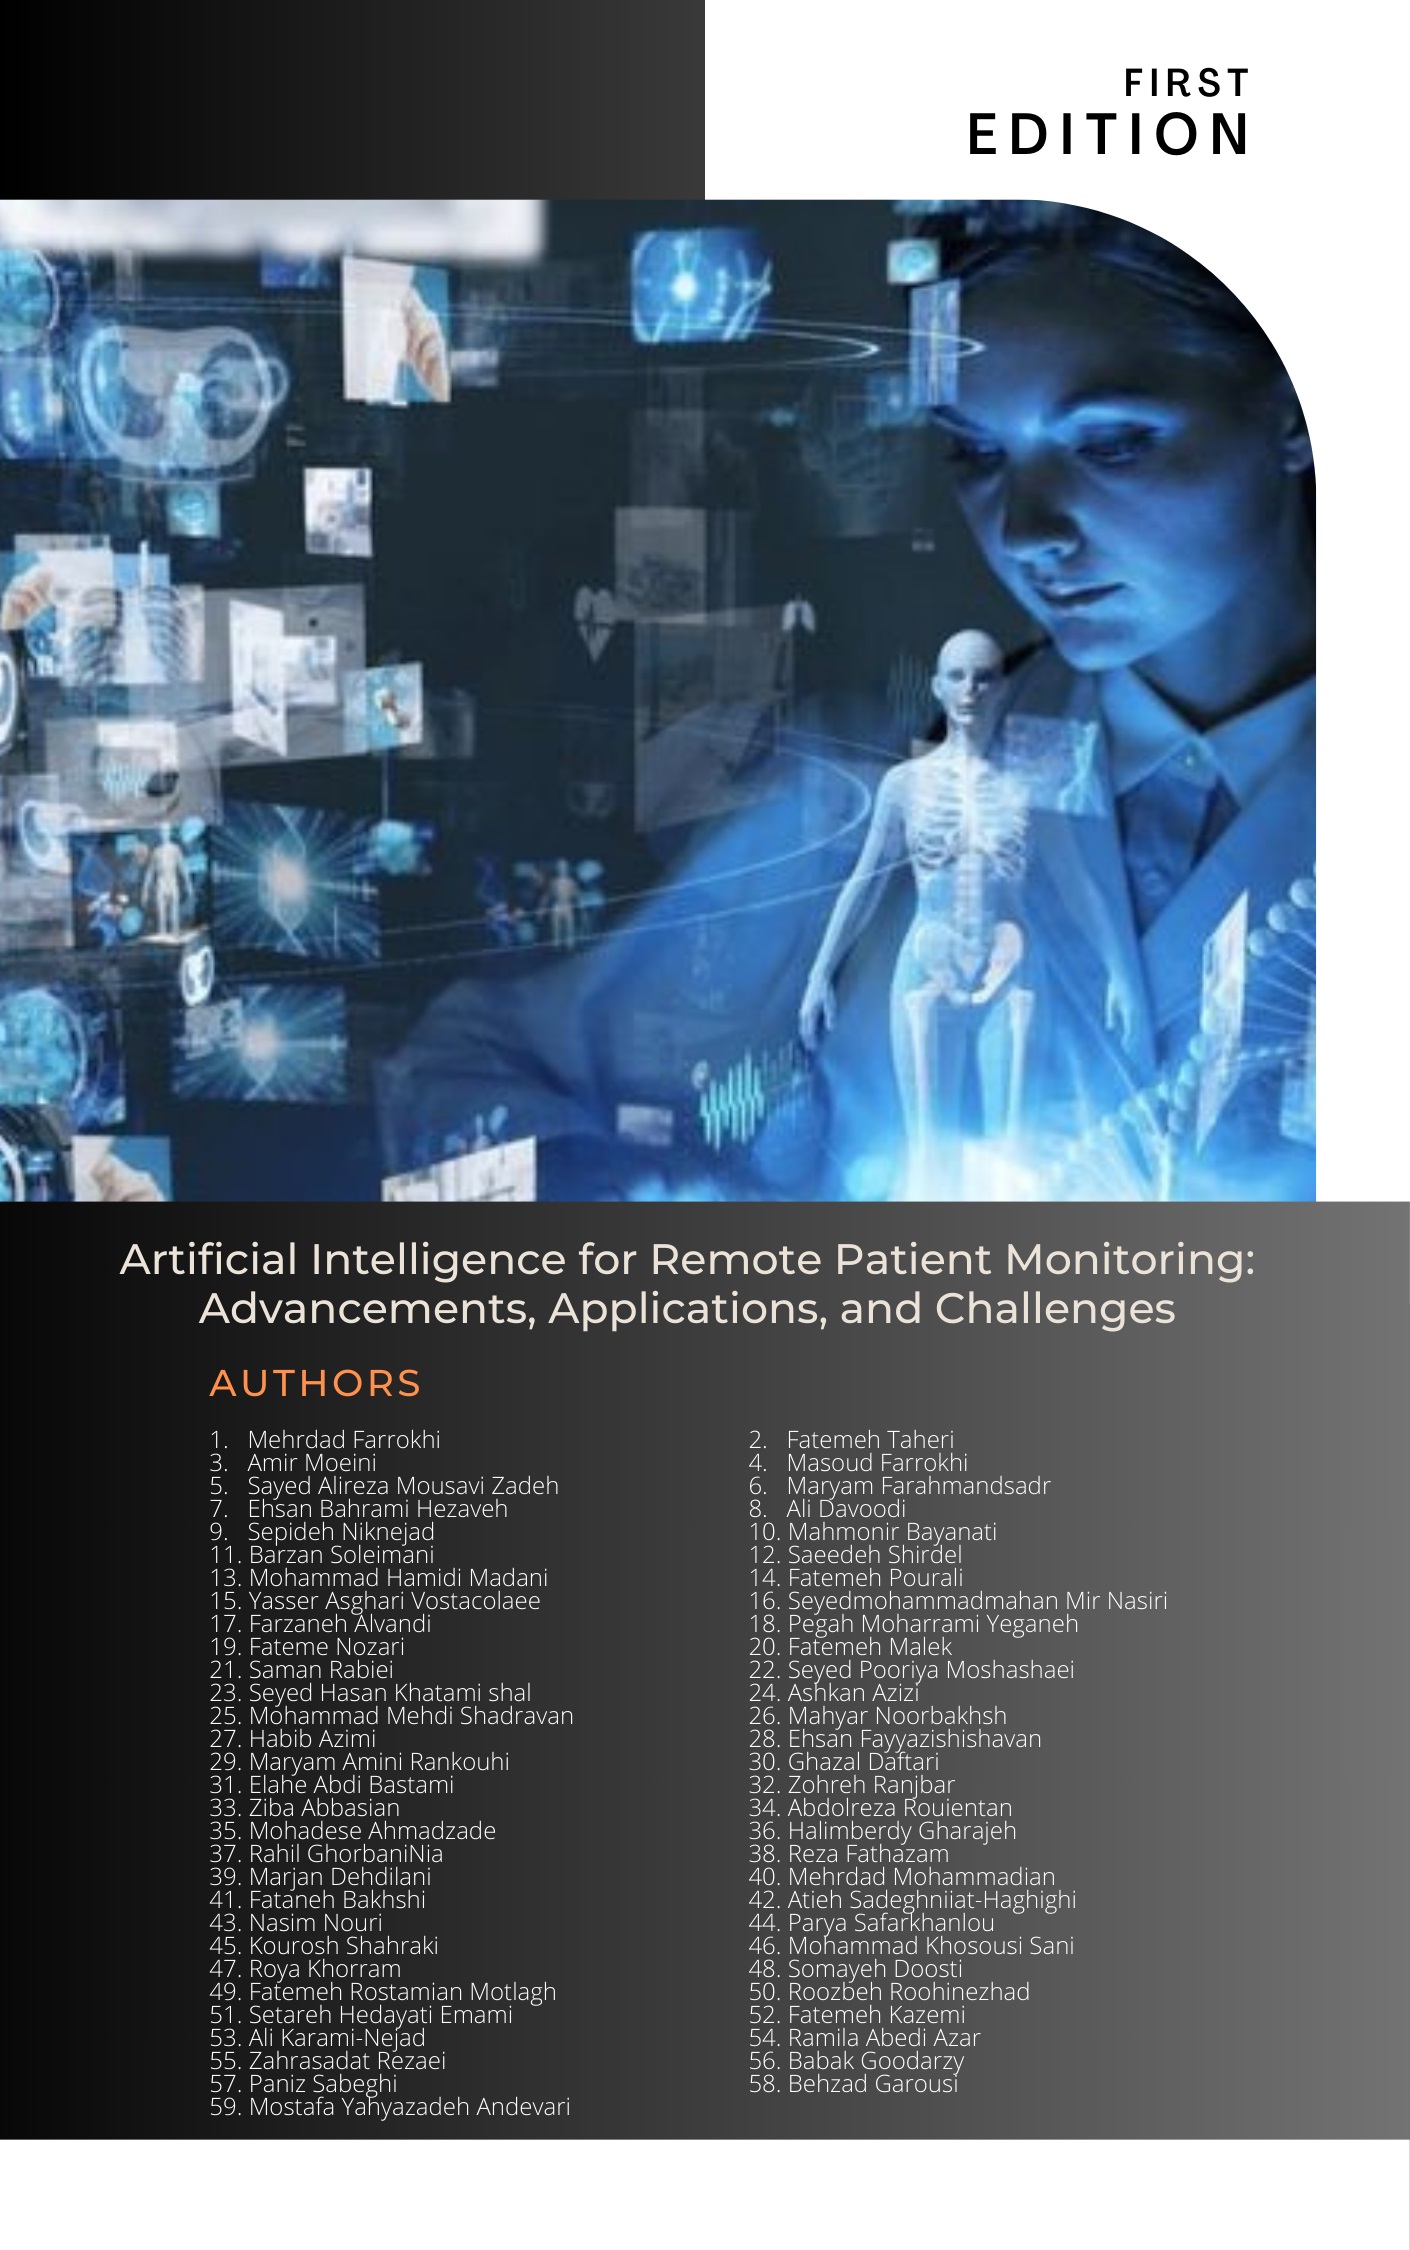 Artificial Intelligence for Remote Patient Monitoring: Advancements, Applications, and Challenges